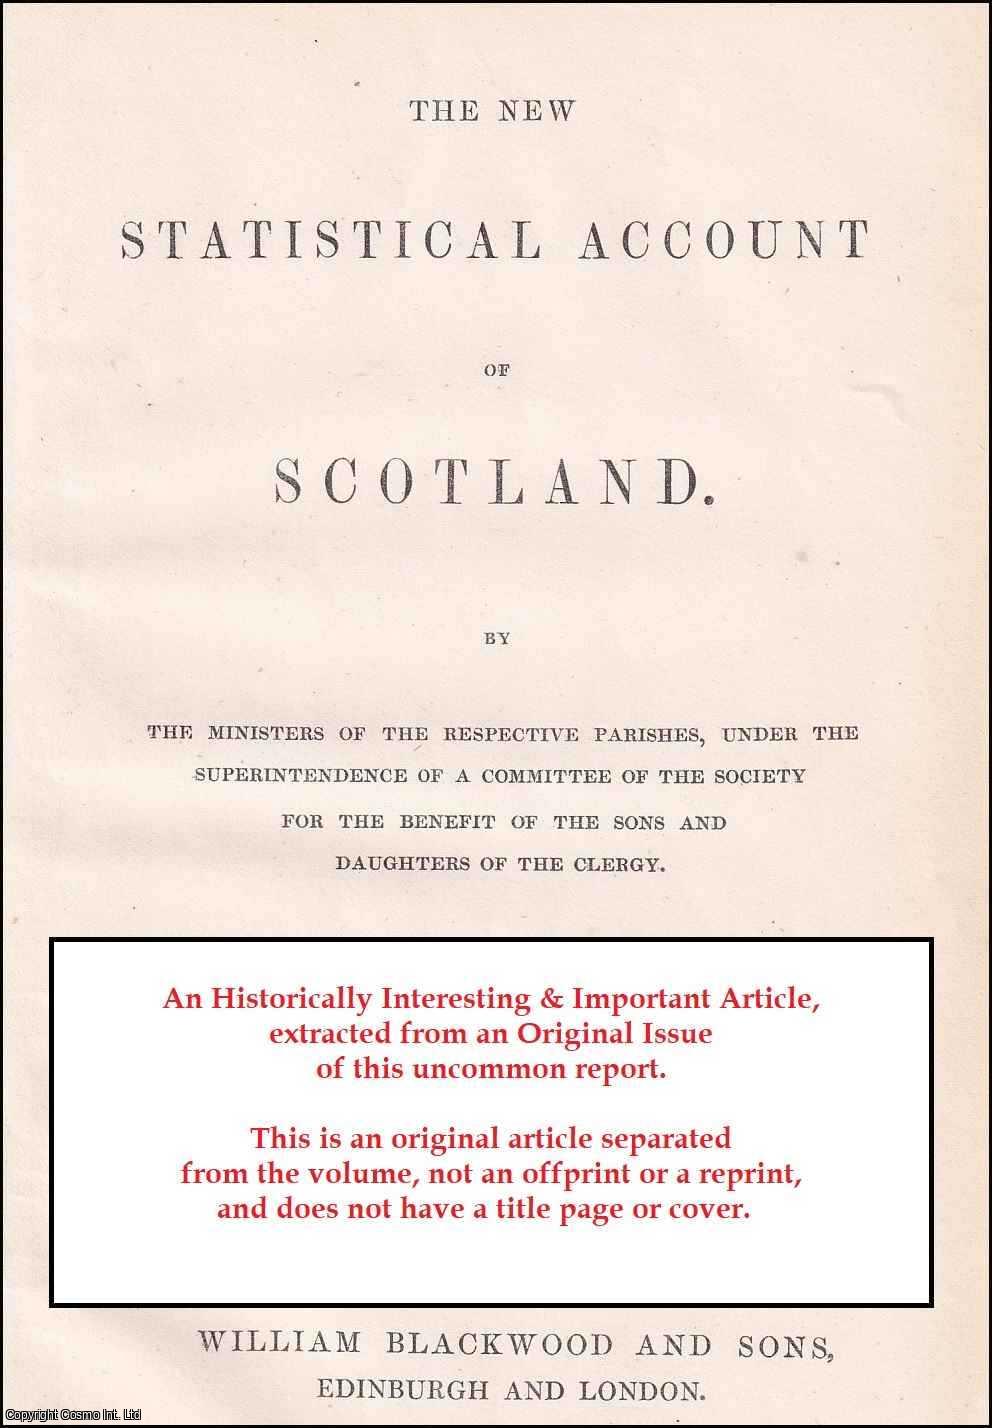 Rev. Thomas Adamson - Parish of Cameron. Presbytery of St. Andrews, Synod of Fife. An uncommon original article from The New Statistical Account of Scotland, 1845.